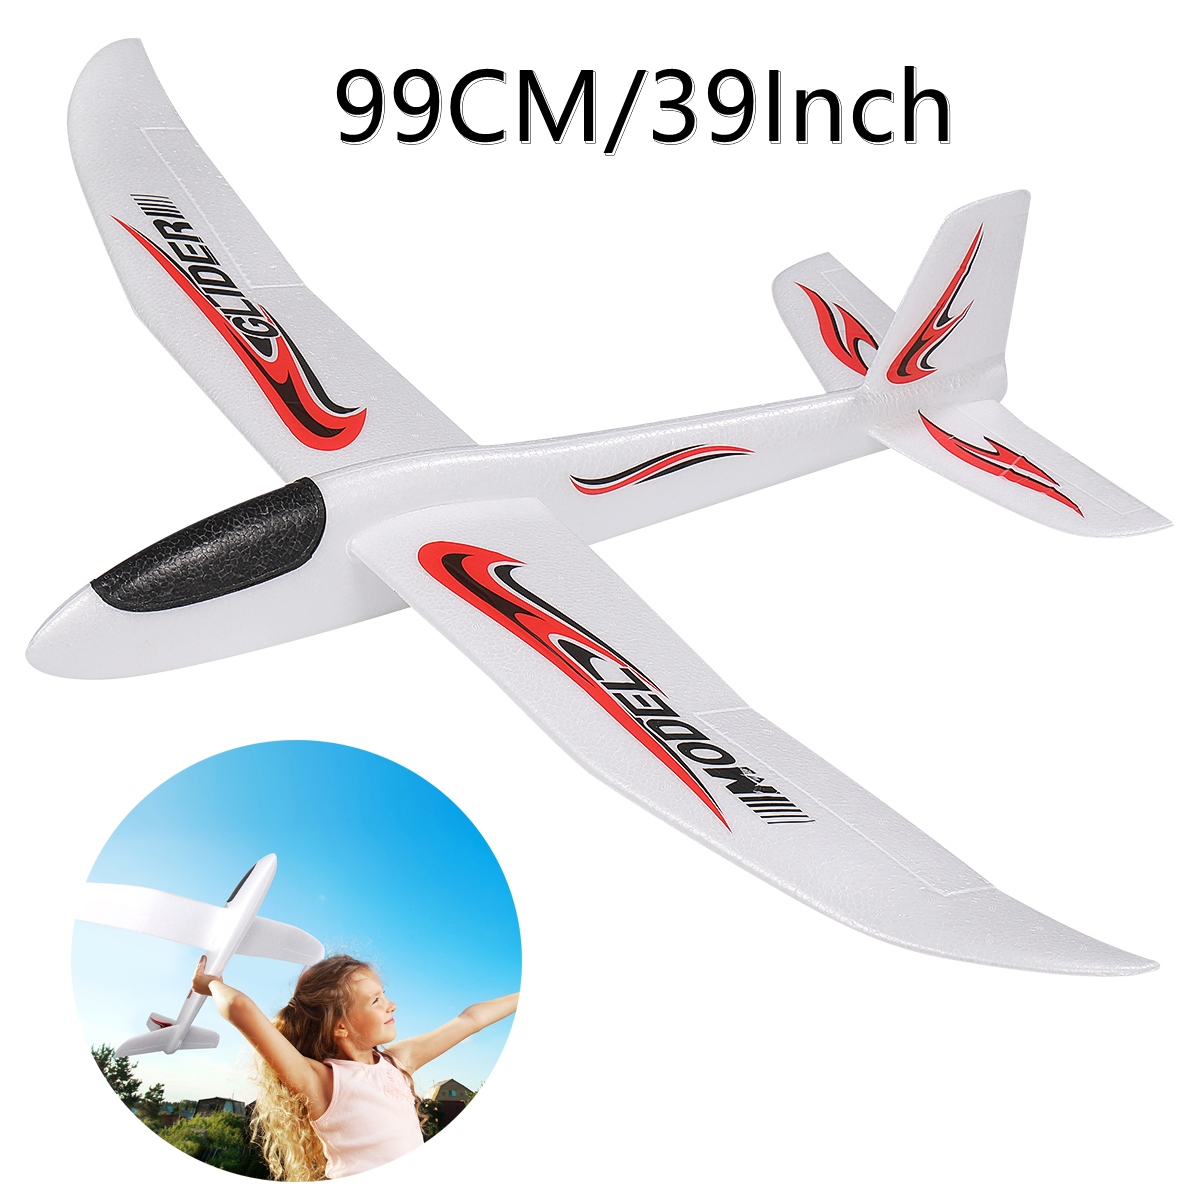 CW 48 99CM Large Foam Glider Airplane Throwing Planes Toy 2 Flight Mode